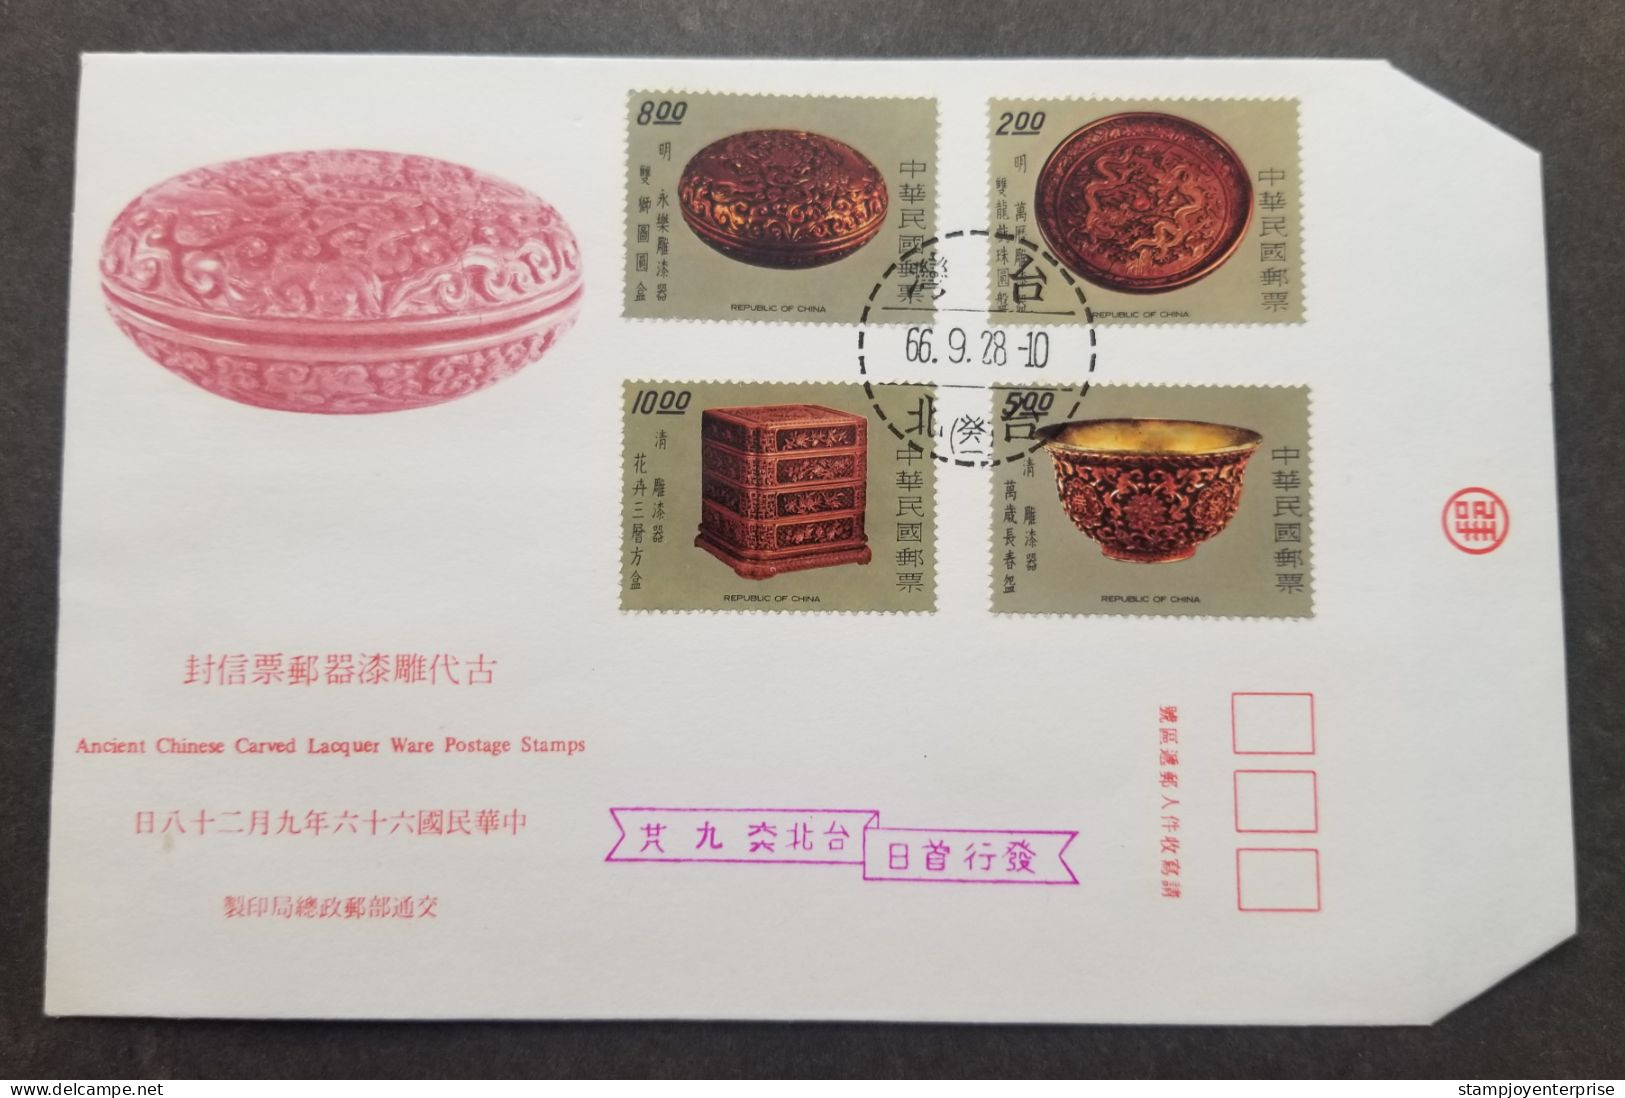 Taiwan Ancient Chinese Carved Lacquer Ware 1977 Craft Dragon (stamp FDC) - Briefe U. Dokumente